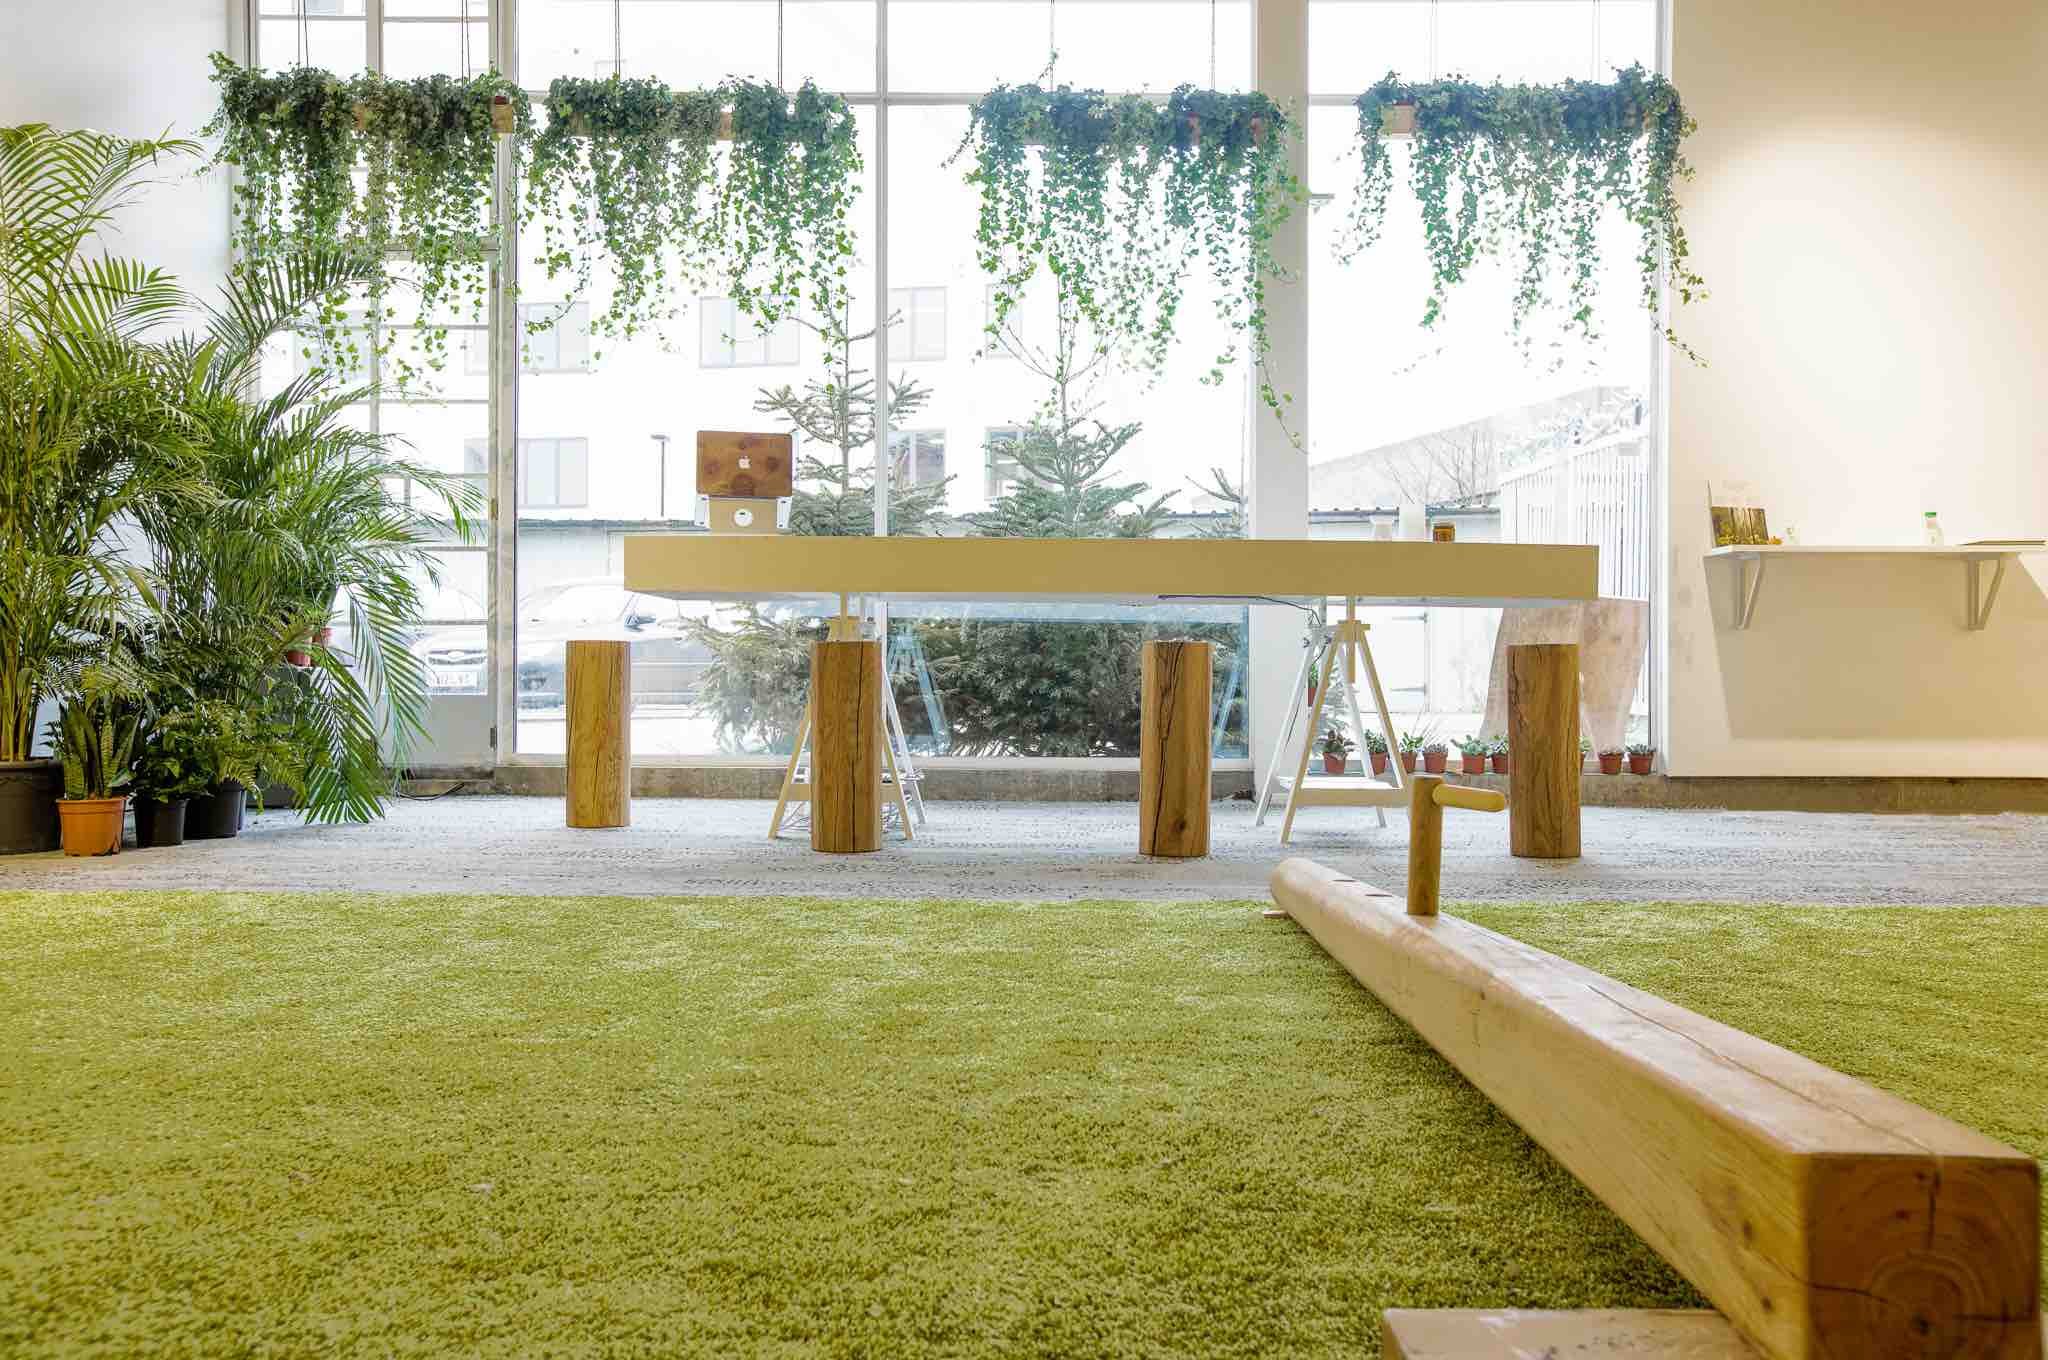 Ecofriendly Modern Office Interior With Brick Wall Waiting Area And Indoor  Plants Stock Photo - Download Image Now - iStock